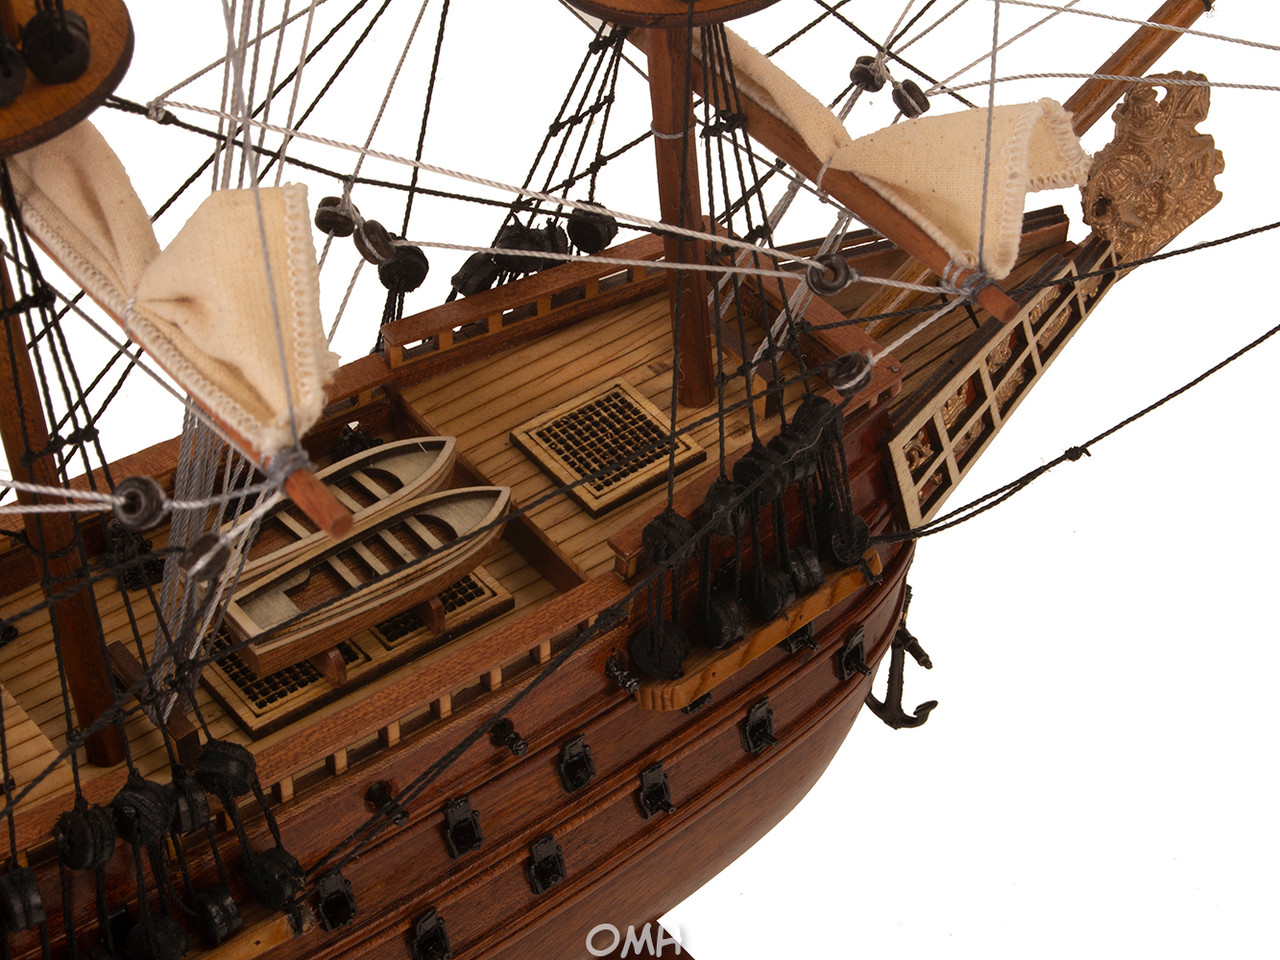 Sovereign of the Seas Model Ship - 20" Museum Quality